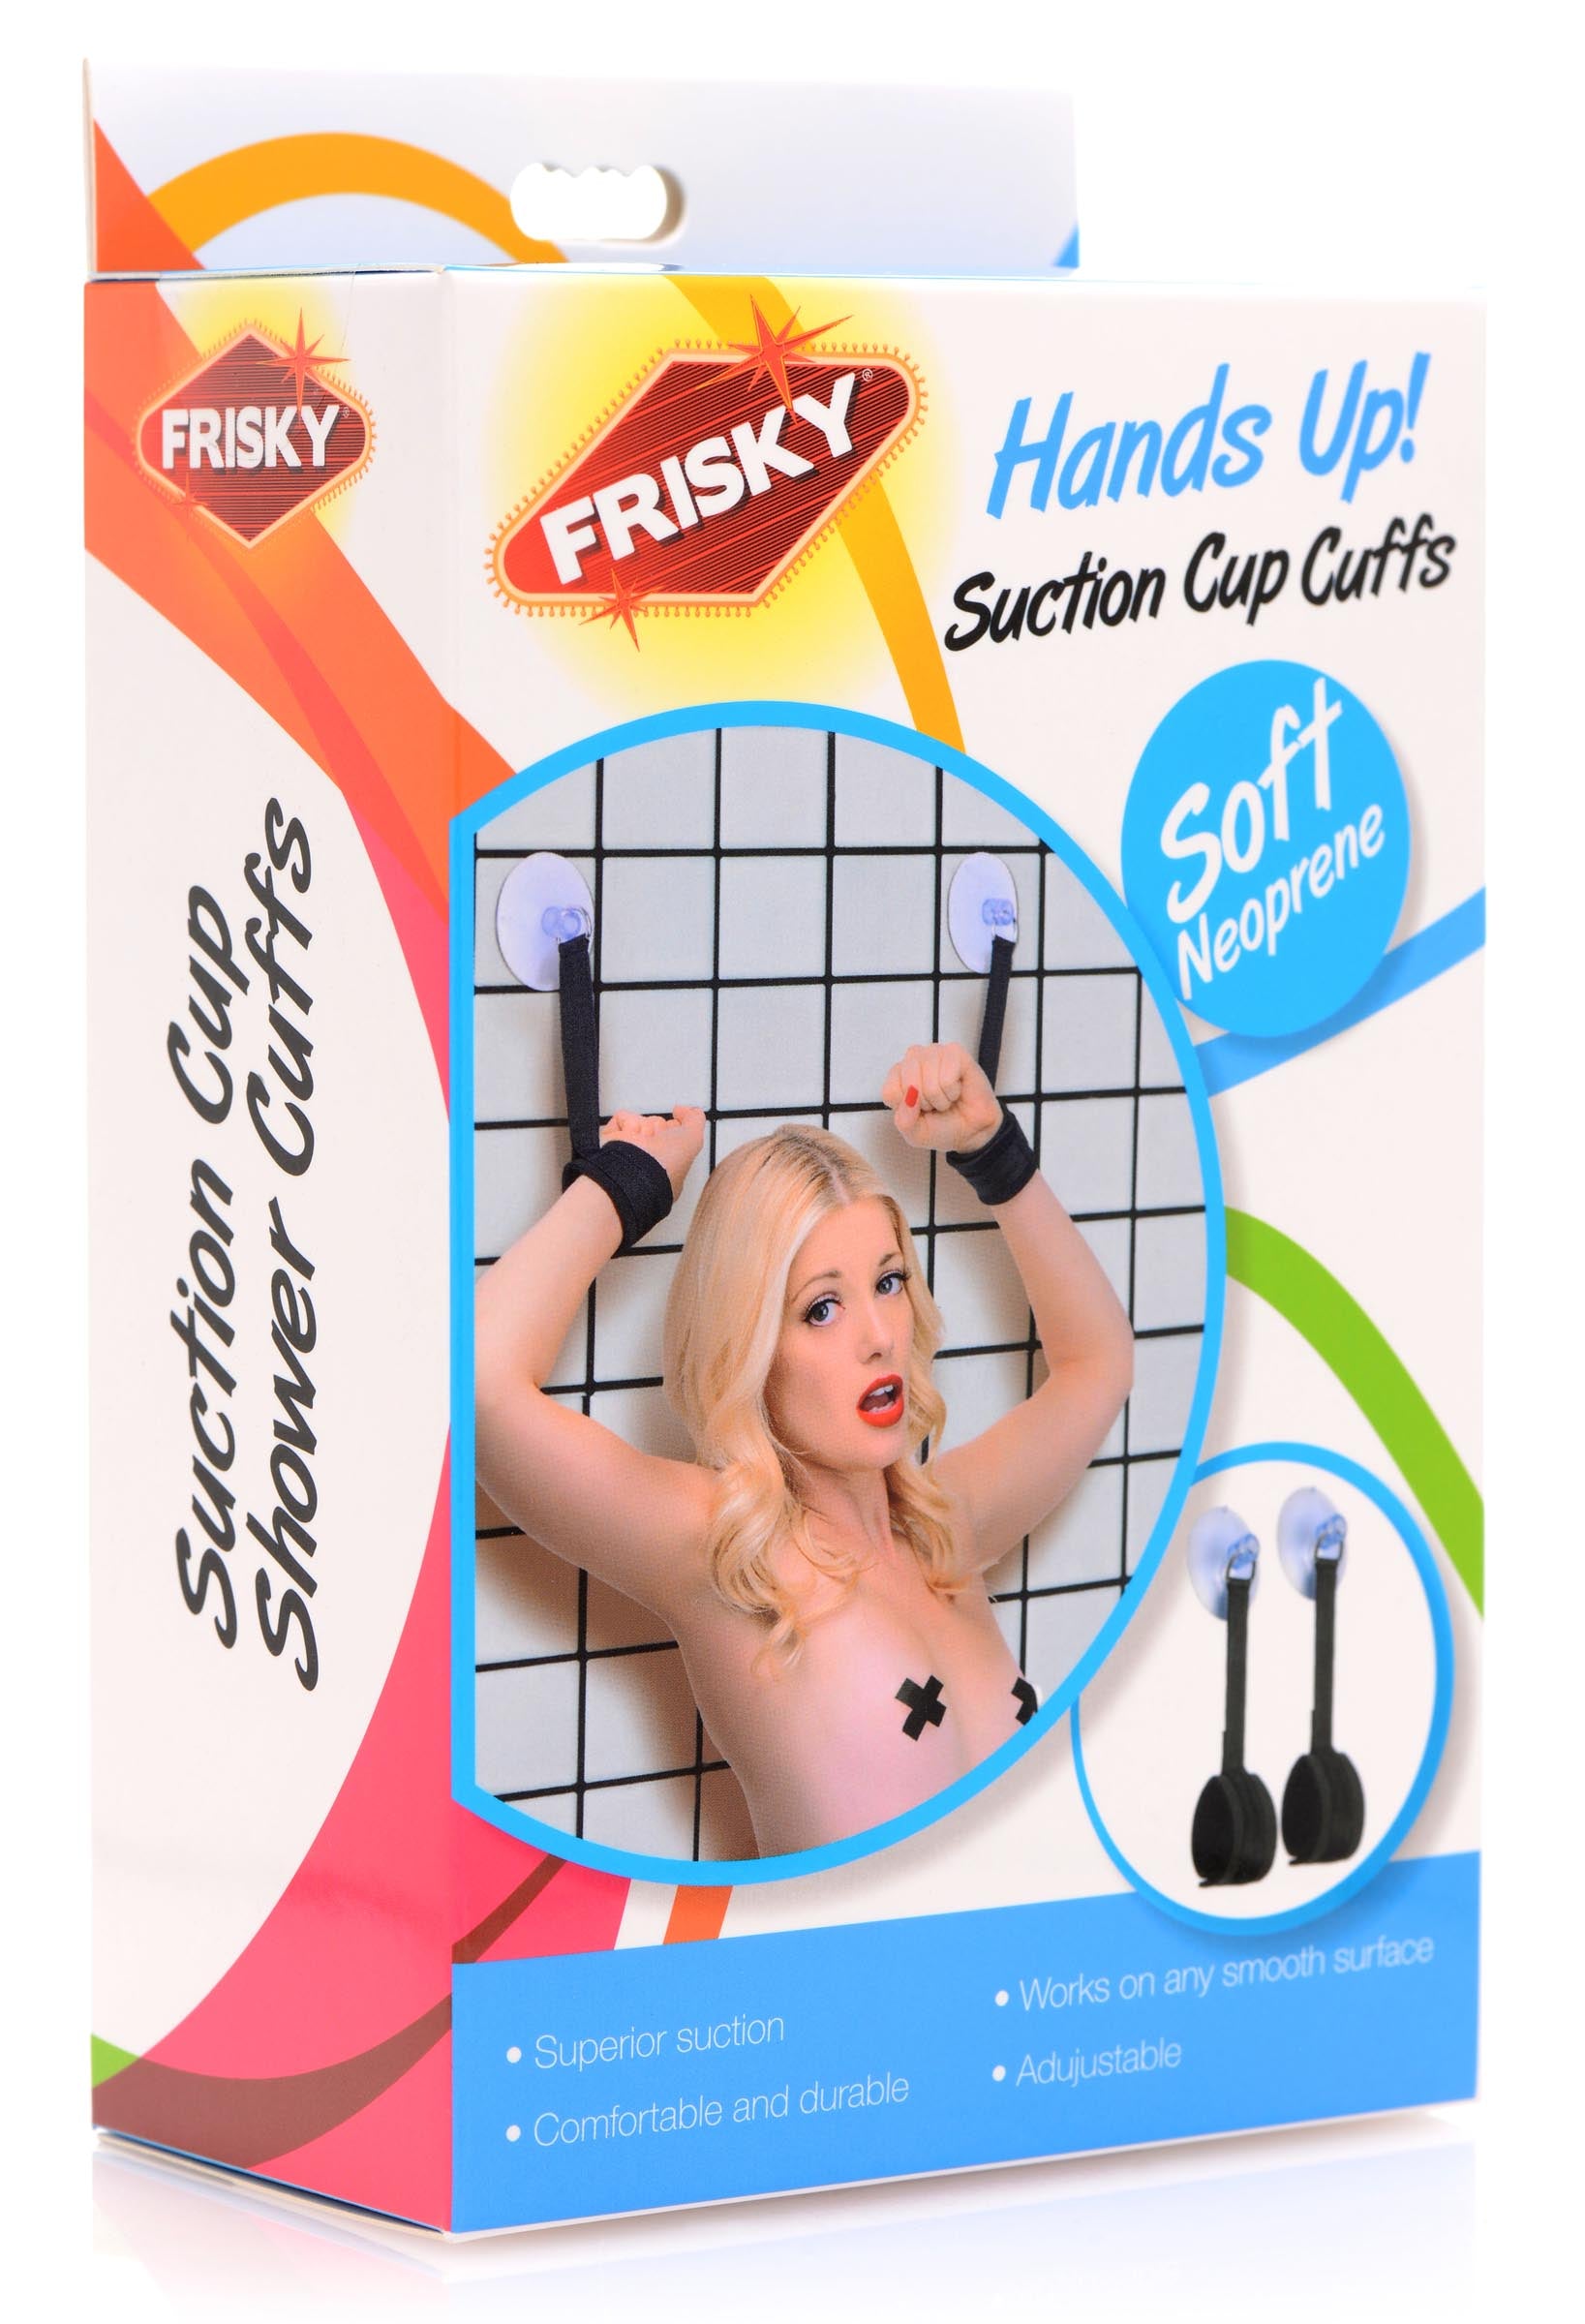 Hands Up! Suction Cup Cuffs - UABDSM